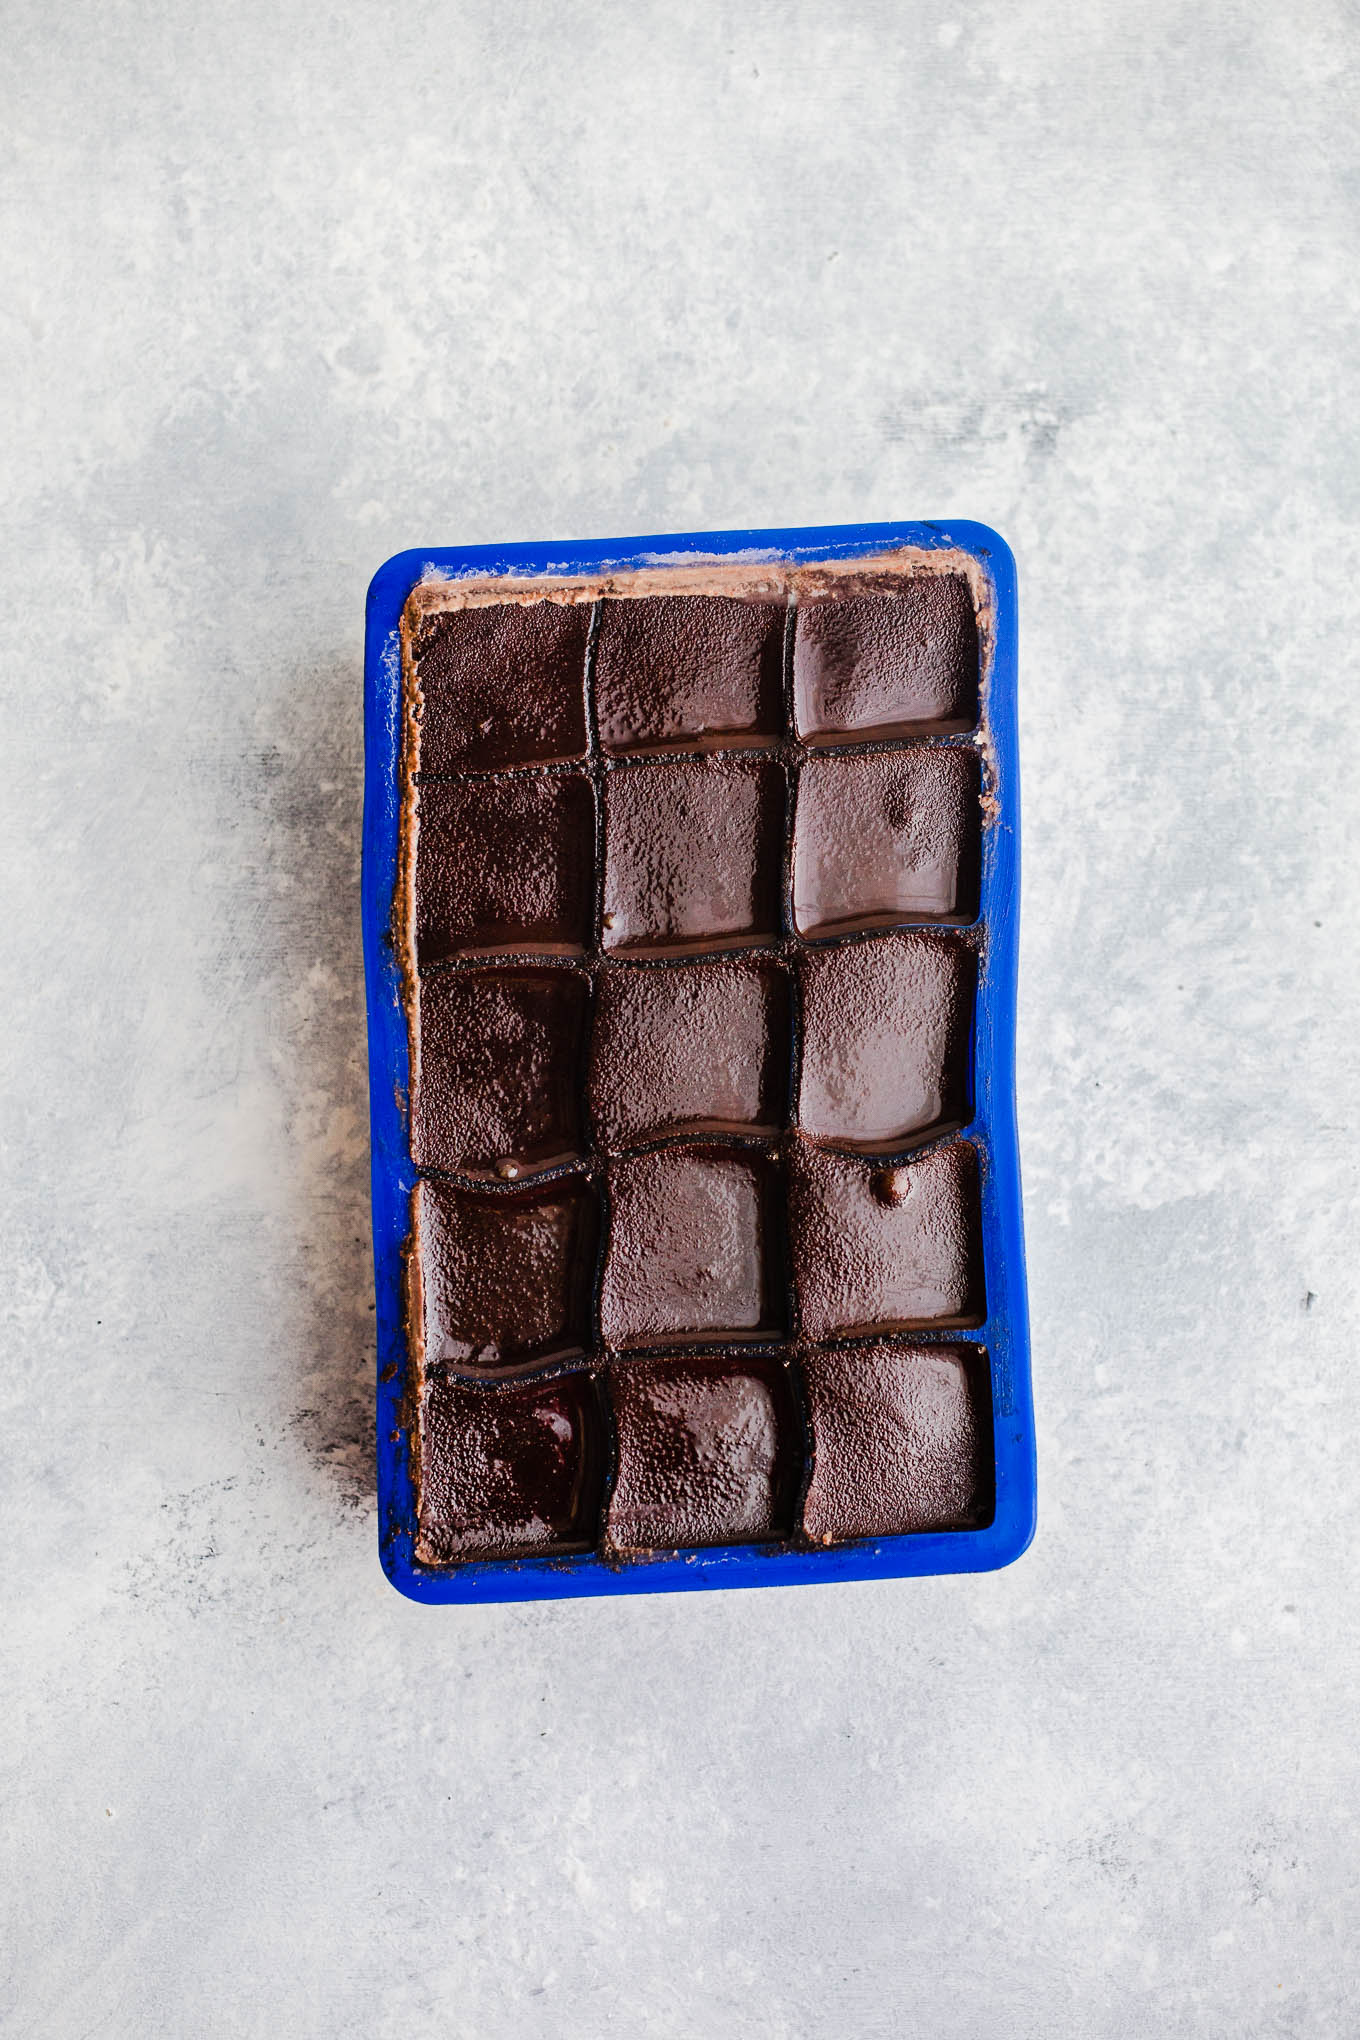 chocolate sorbet in an ice cube tray